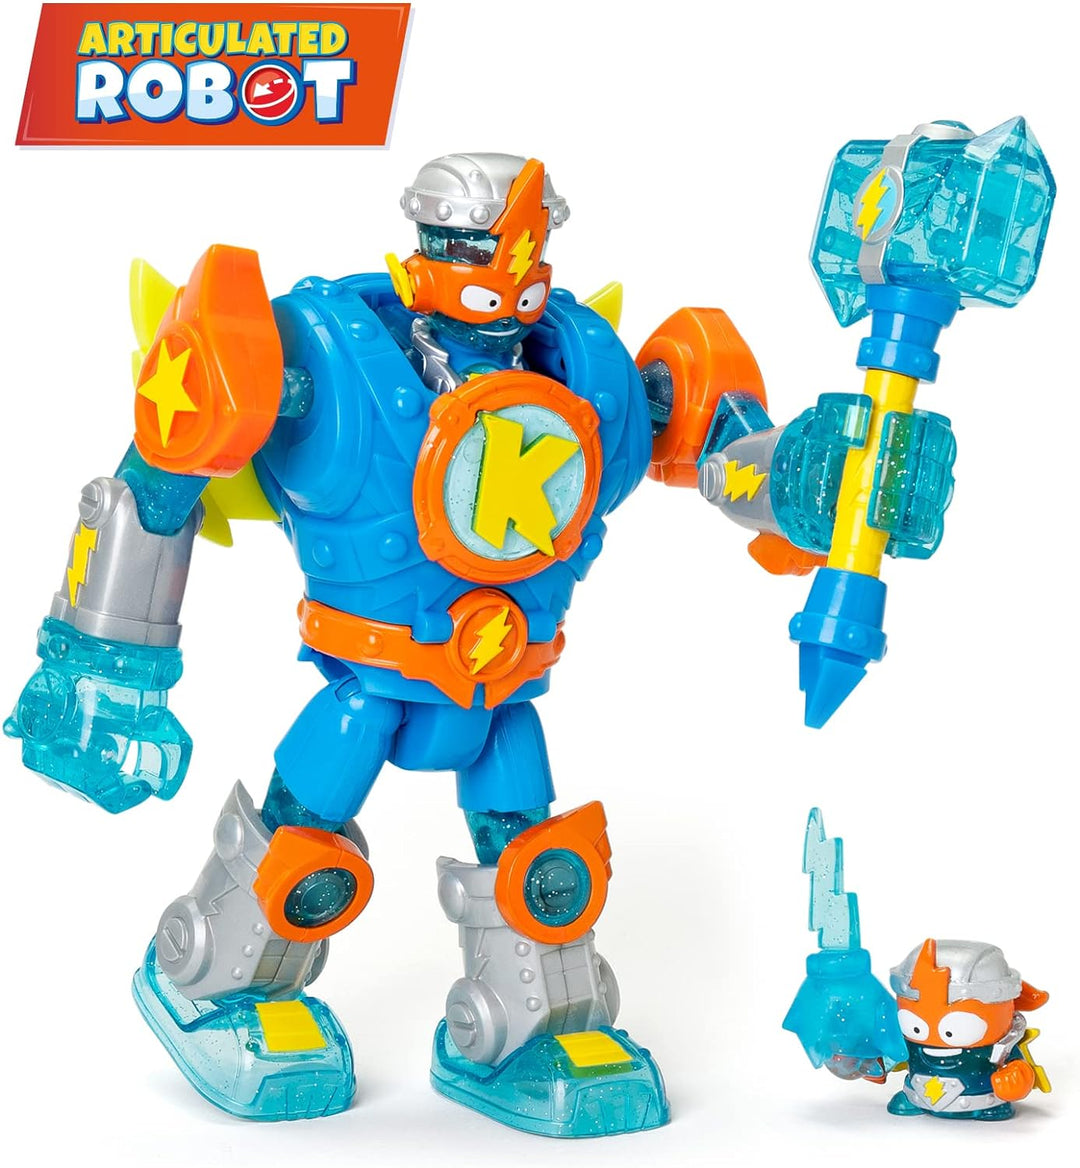 SUPERTHINGS RIVALS OF KABOOM Superbot Kazoom Power – Articulated robot with combat accessories